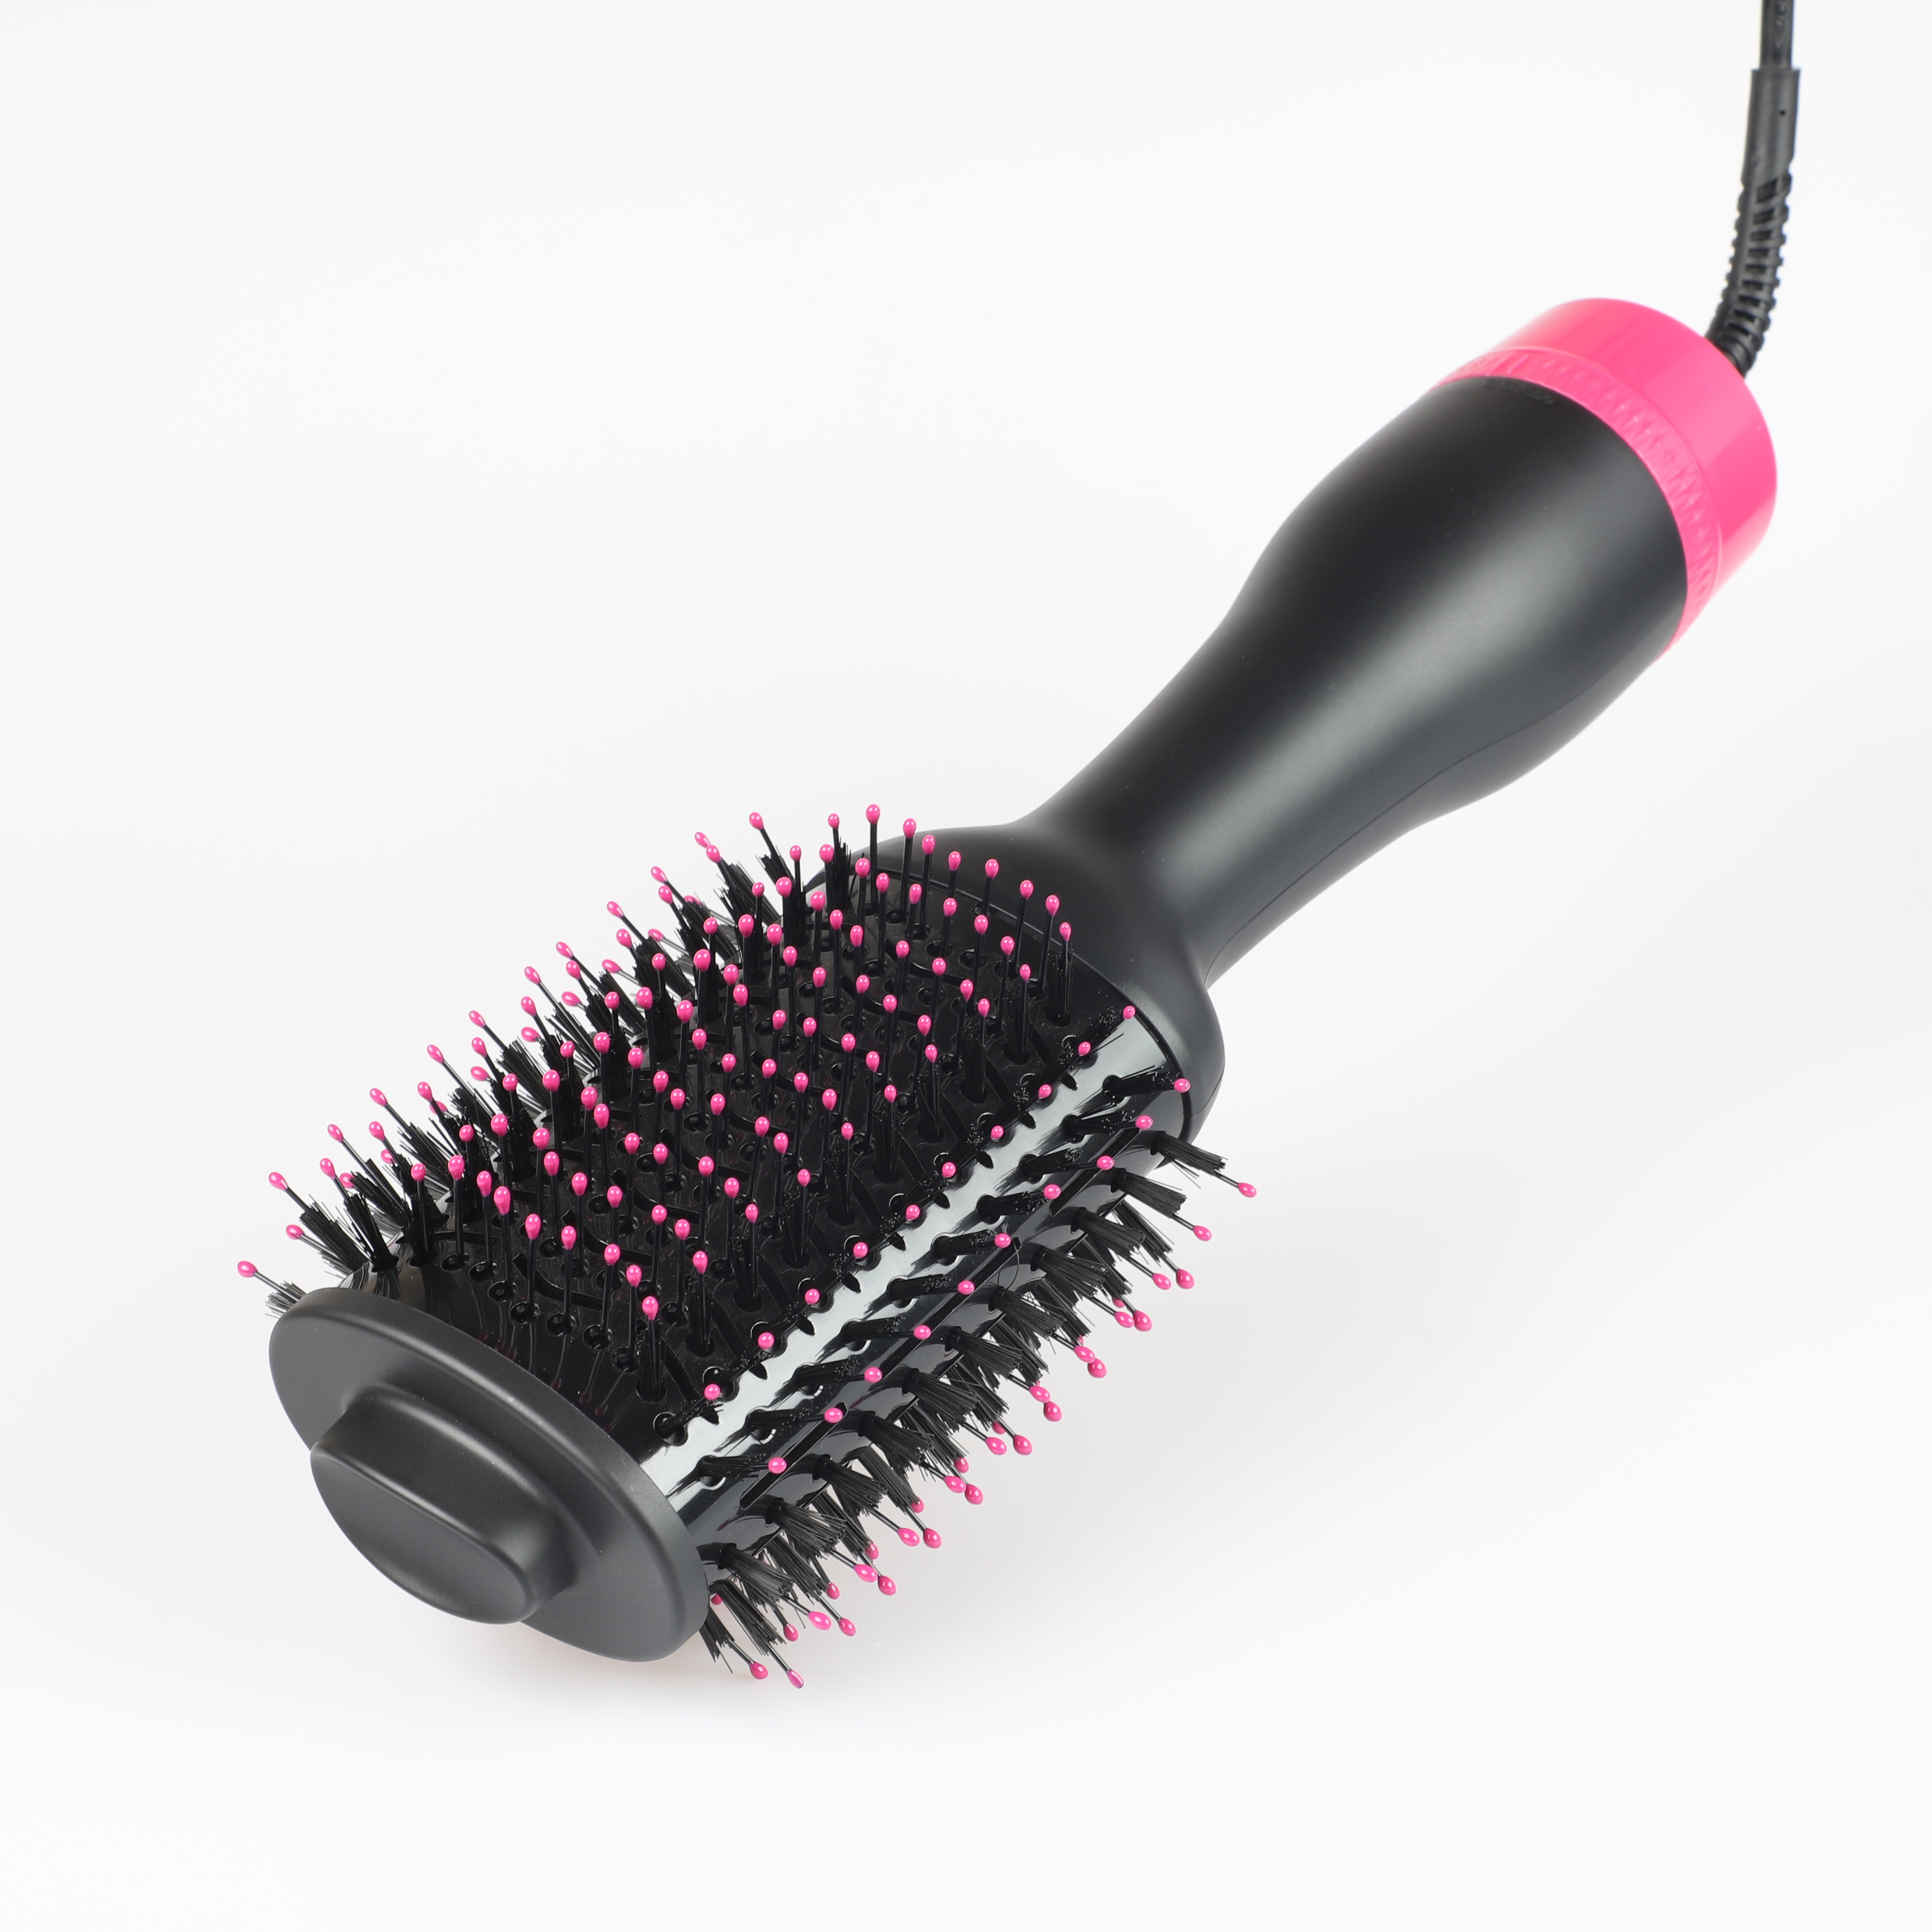 One-Step Hair Dryer With Comb Attachment Air Dryer Brush Comb And Hair Straightener Brush hot air brush